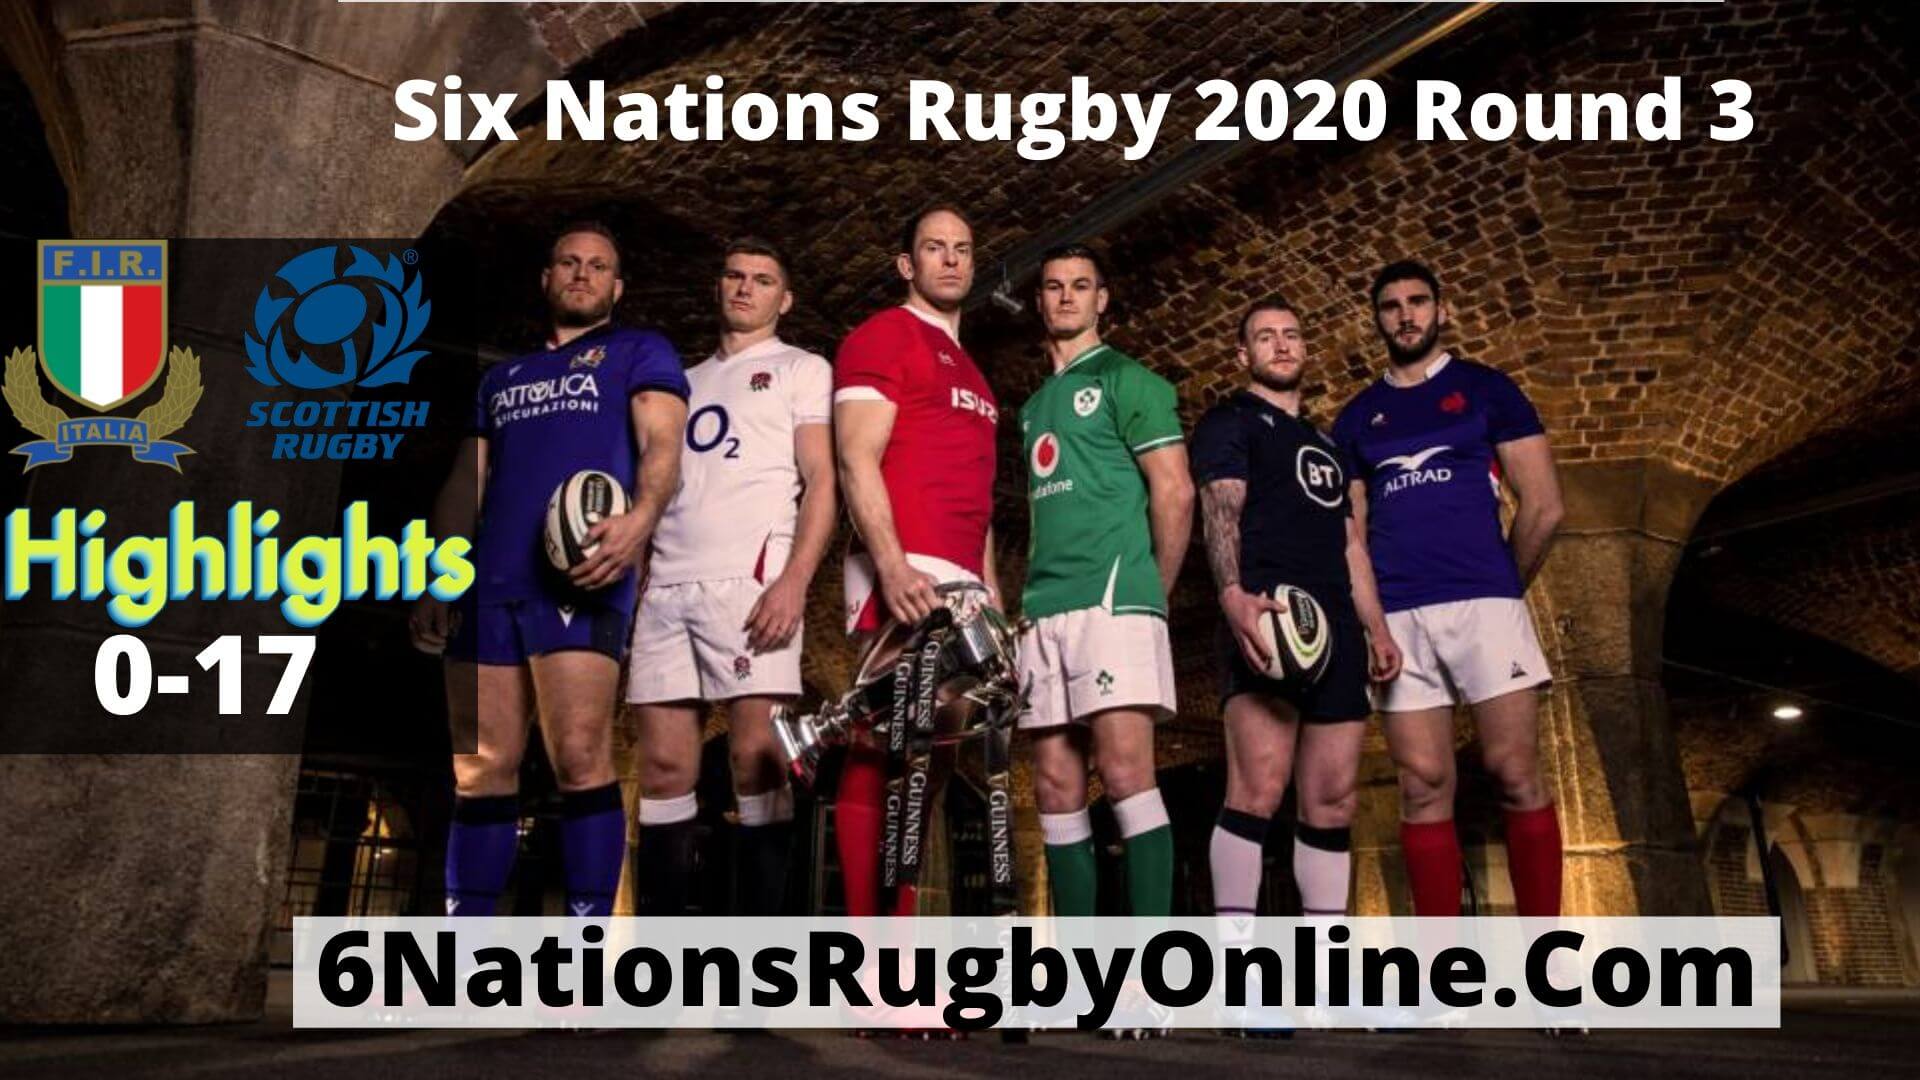 Italy Vs Scotland highlights 2020 Rd 3 Six Nations Rugby